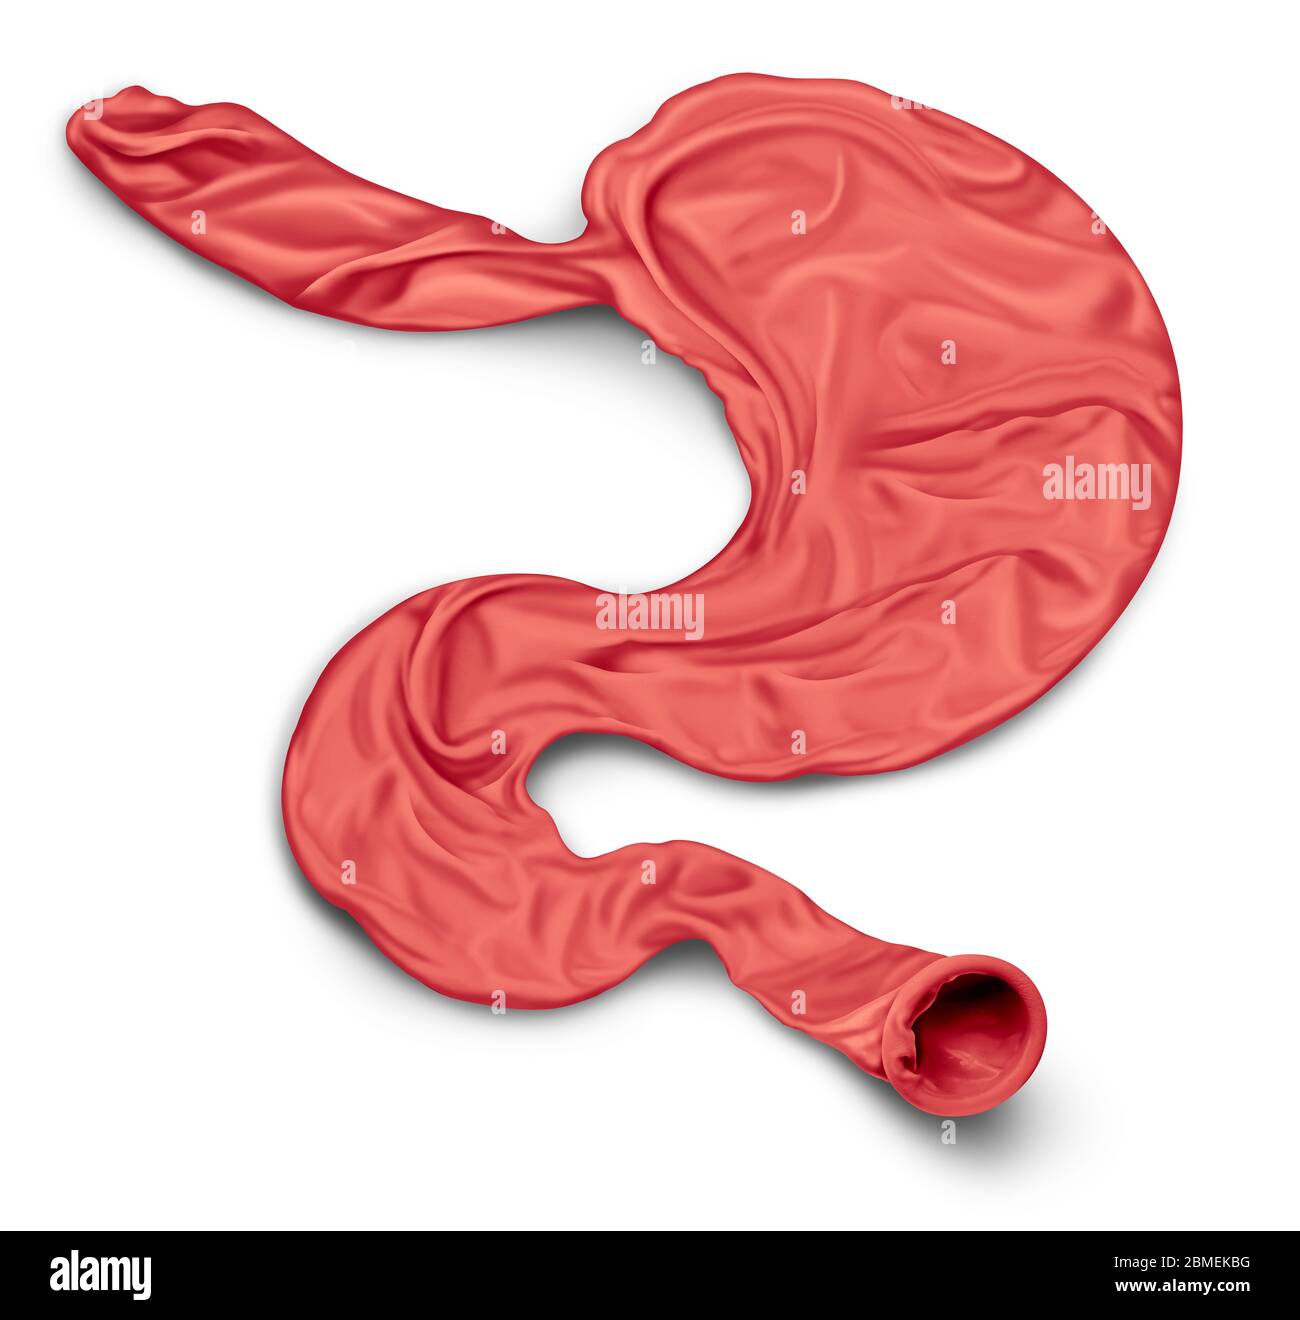 Appetite loss and calorie restriction concept as a human stomach shaped as a shrunk balloon as a fasting diet or dieting symbol for anorexia. Stock Photo